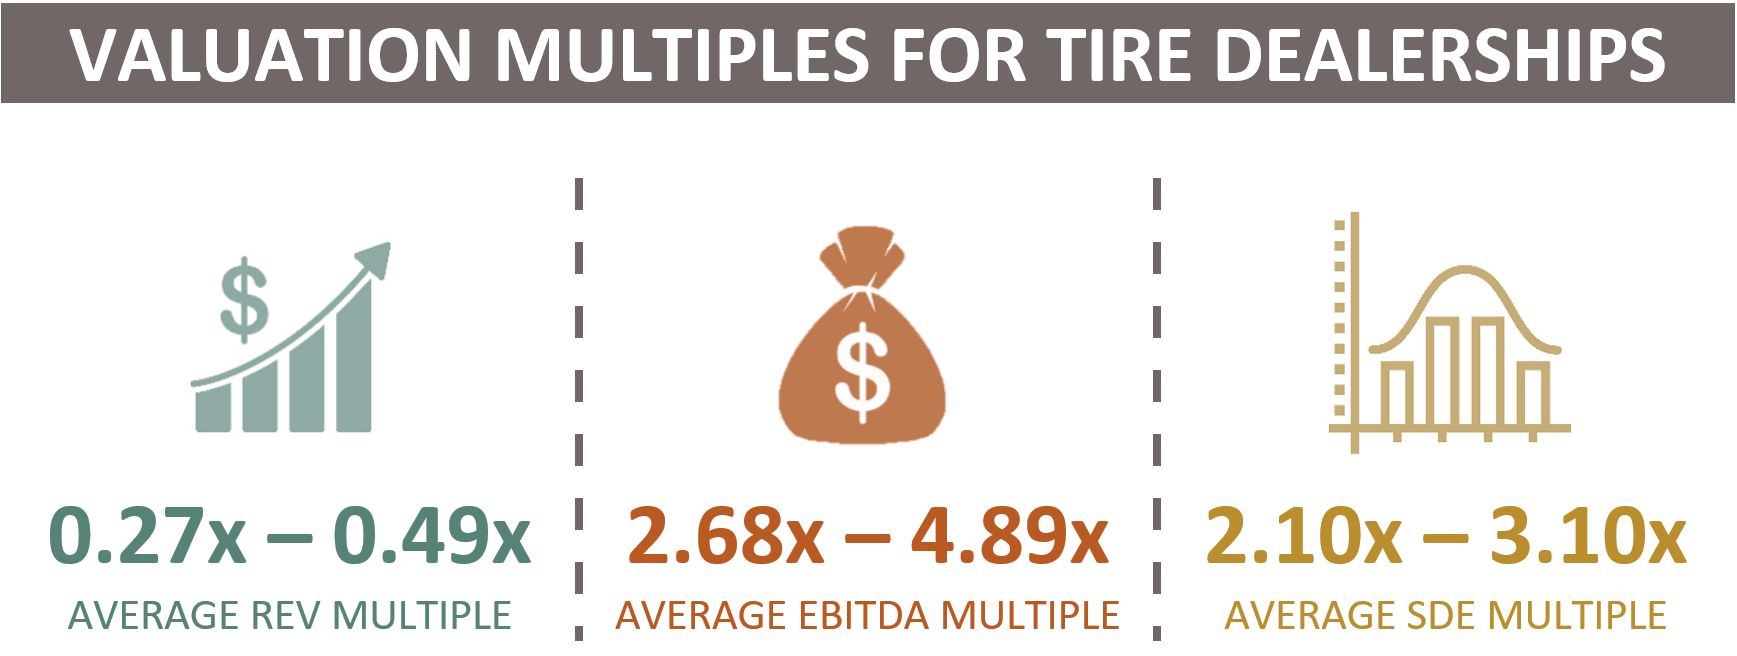 Valuation Multiples For a Tire Dealership